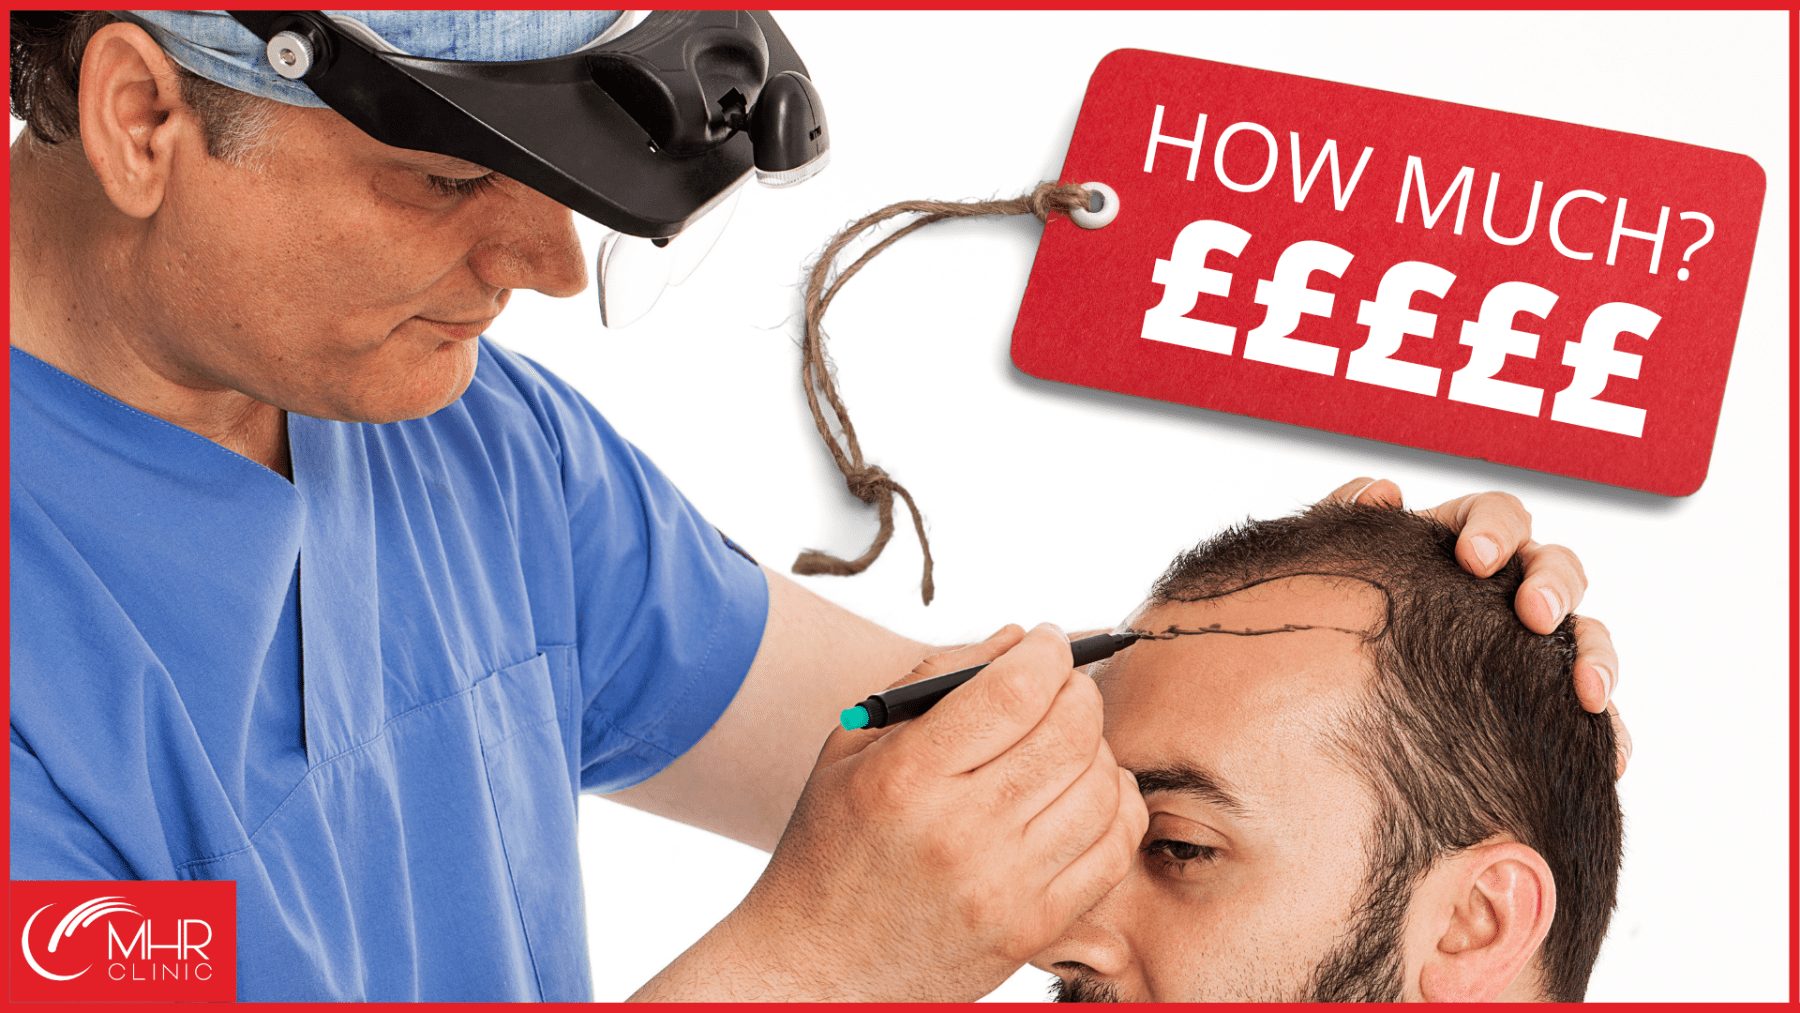 How much is a hair transplant in the UK?